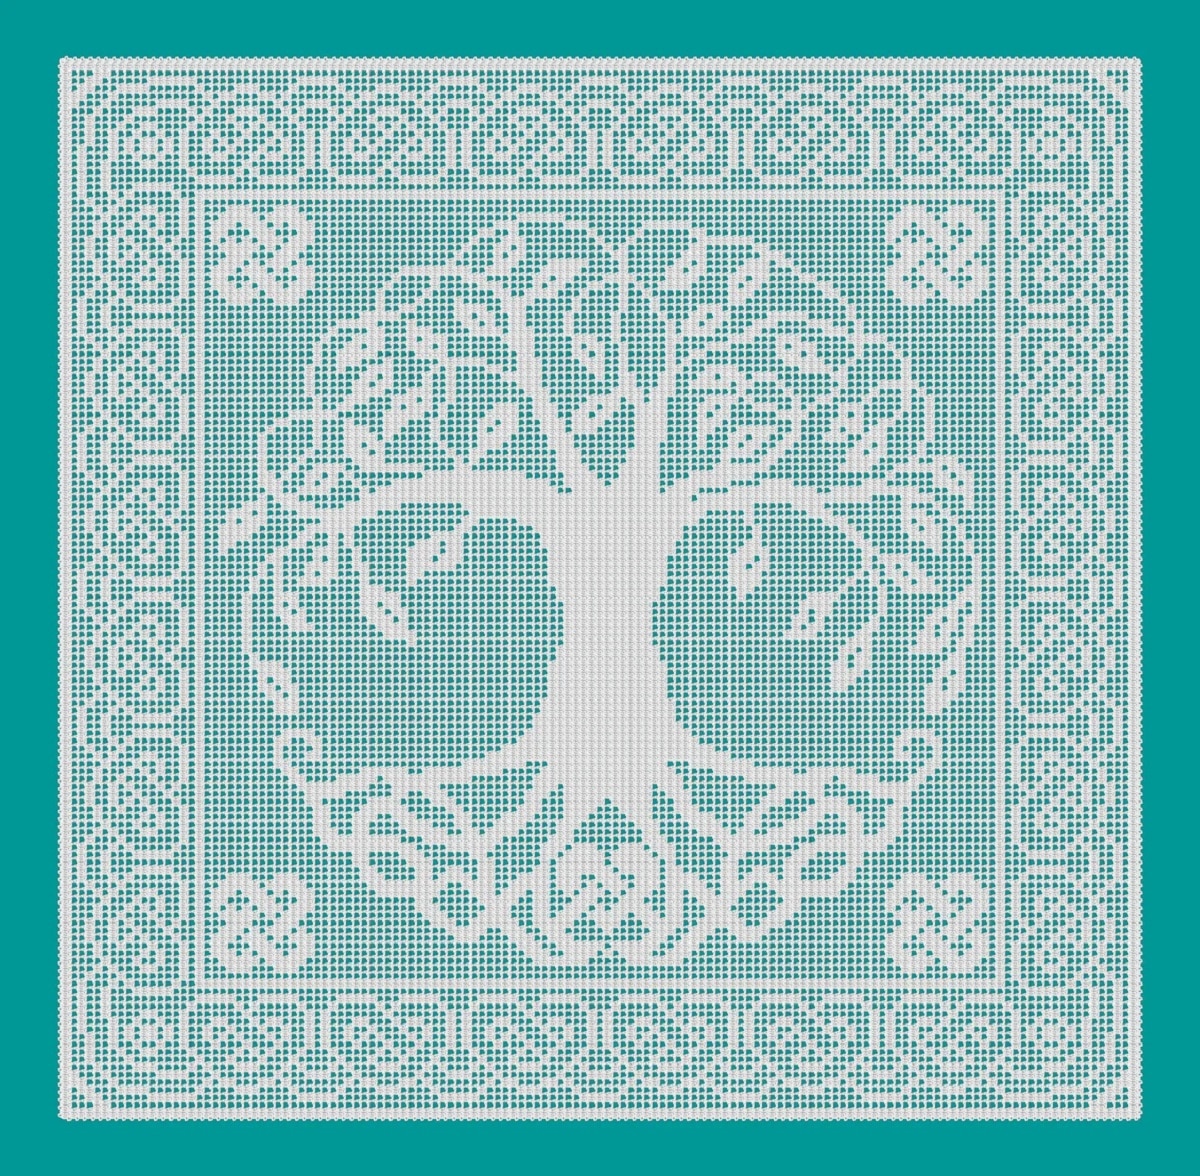 Green and white celtic style tree of life in the center with heart shaped stitches as a border on all sides.